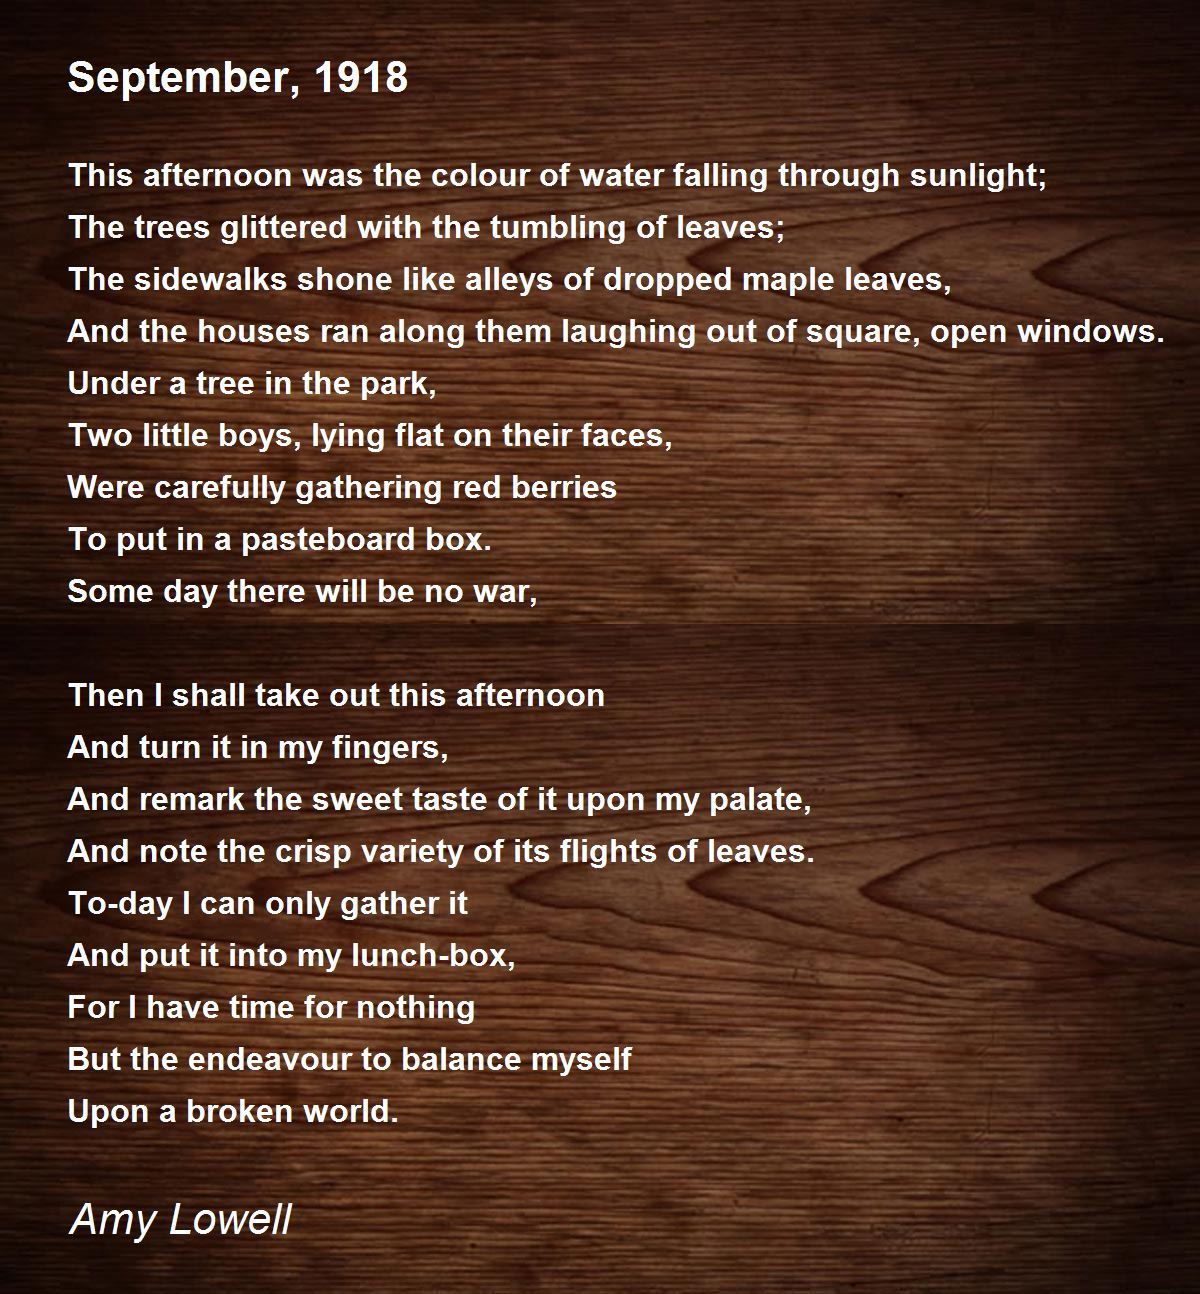 September, 1918 Poem by Amy Lowell - Poem Hunter Comments